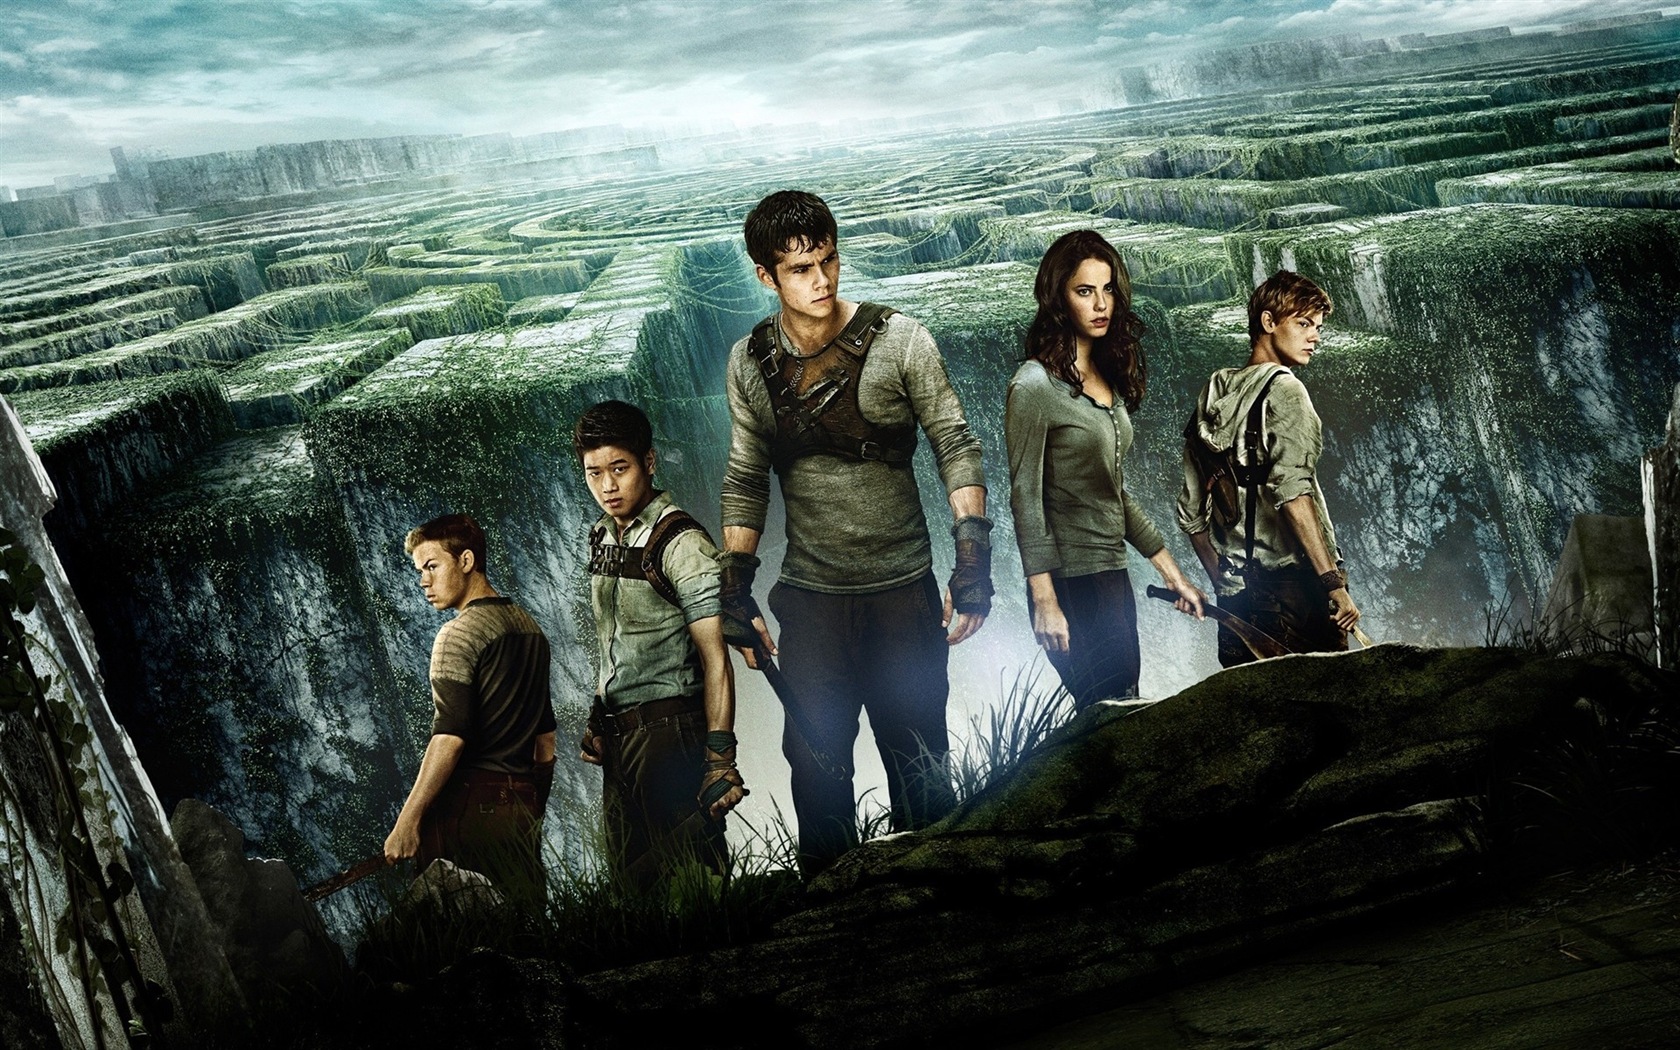 The Maze Runner HD movie wallpapers #1 - 1680x1050